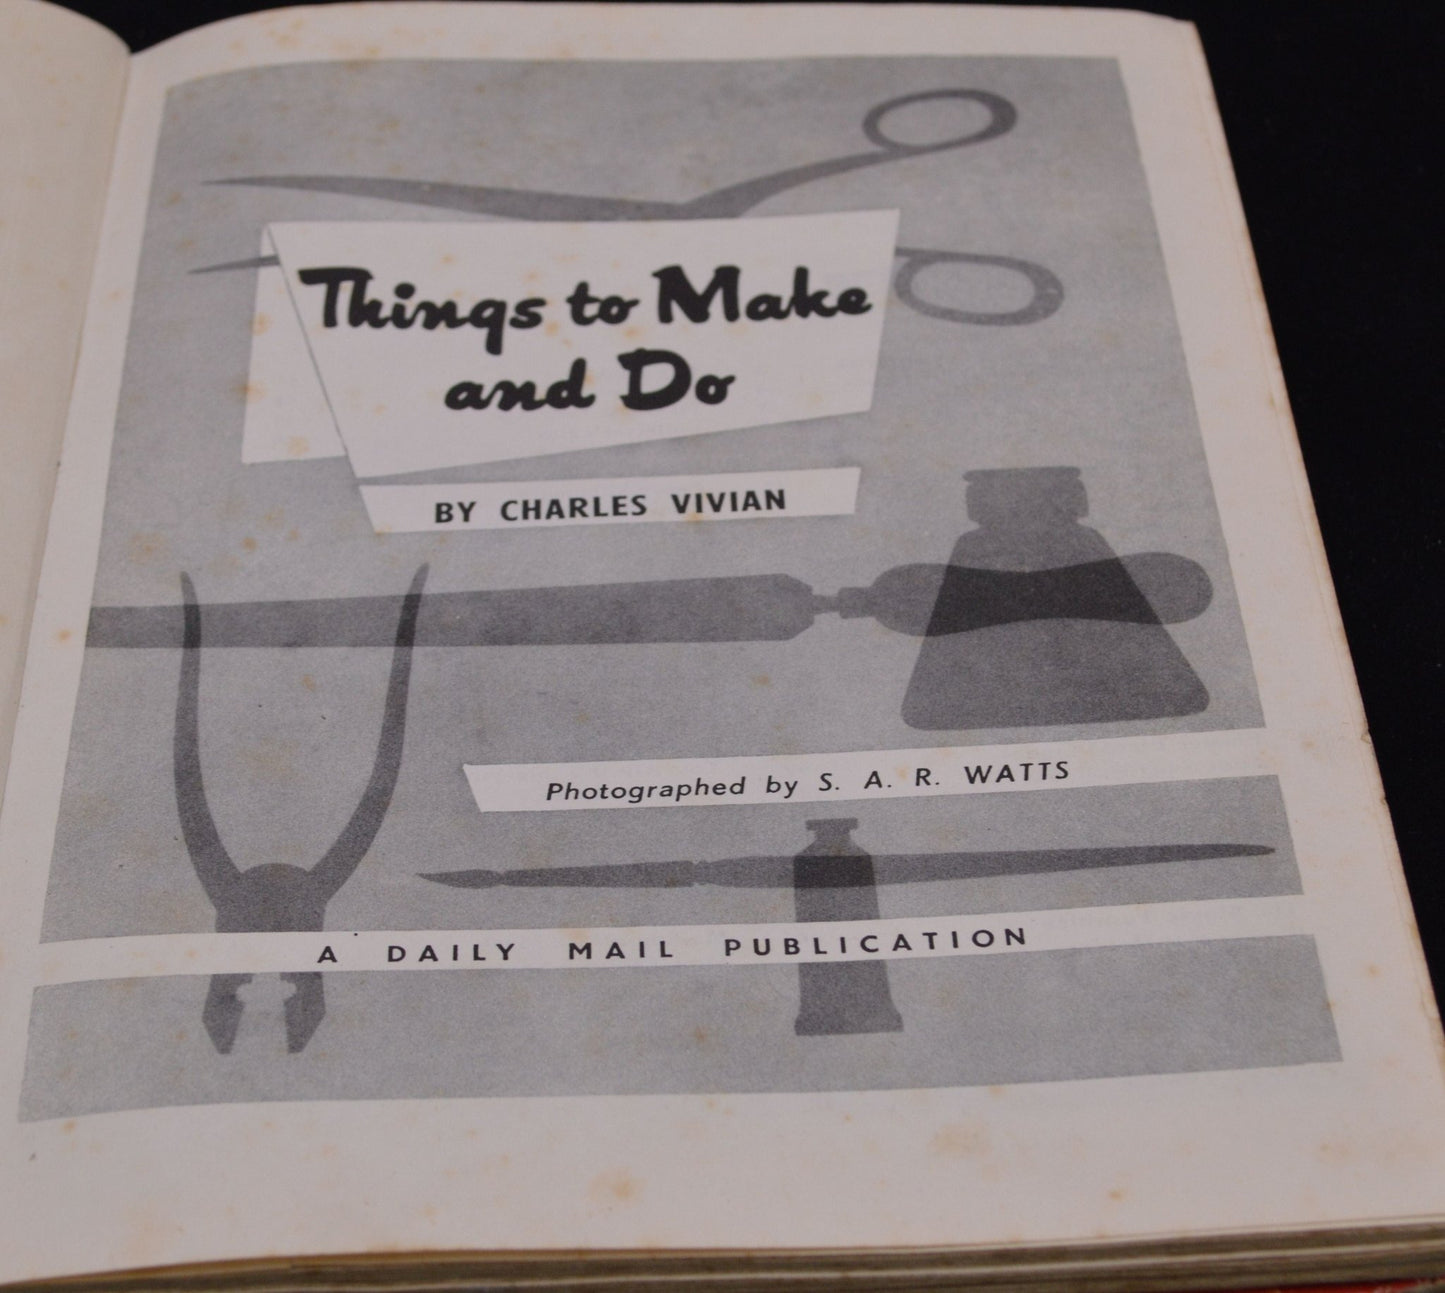 SECONDHAND BOOK THINGS TO MAKE & DO by CHARLES VIVIAN GOOD CONDITION - TMD167207